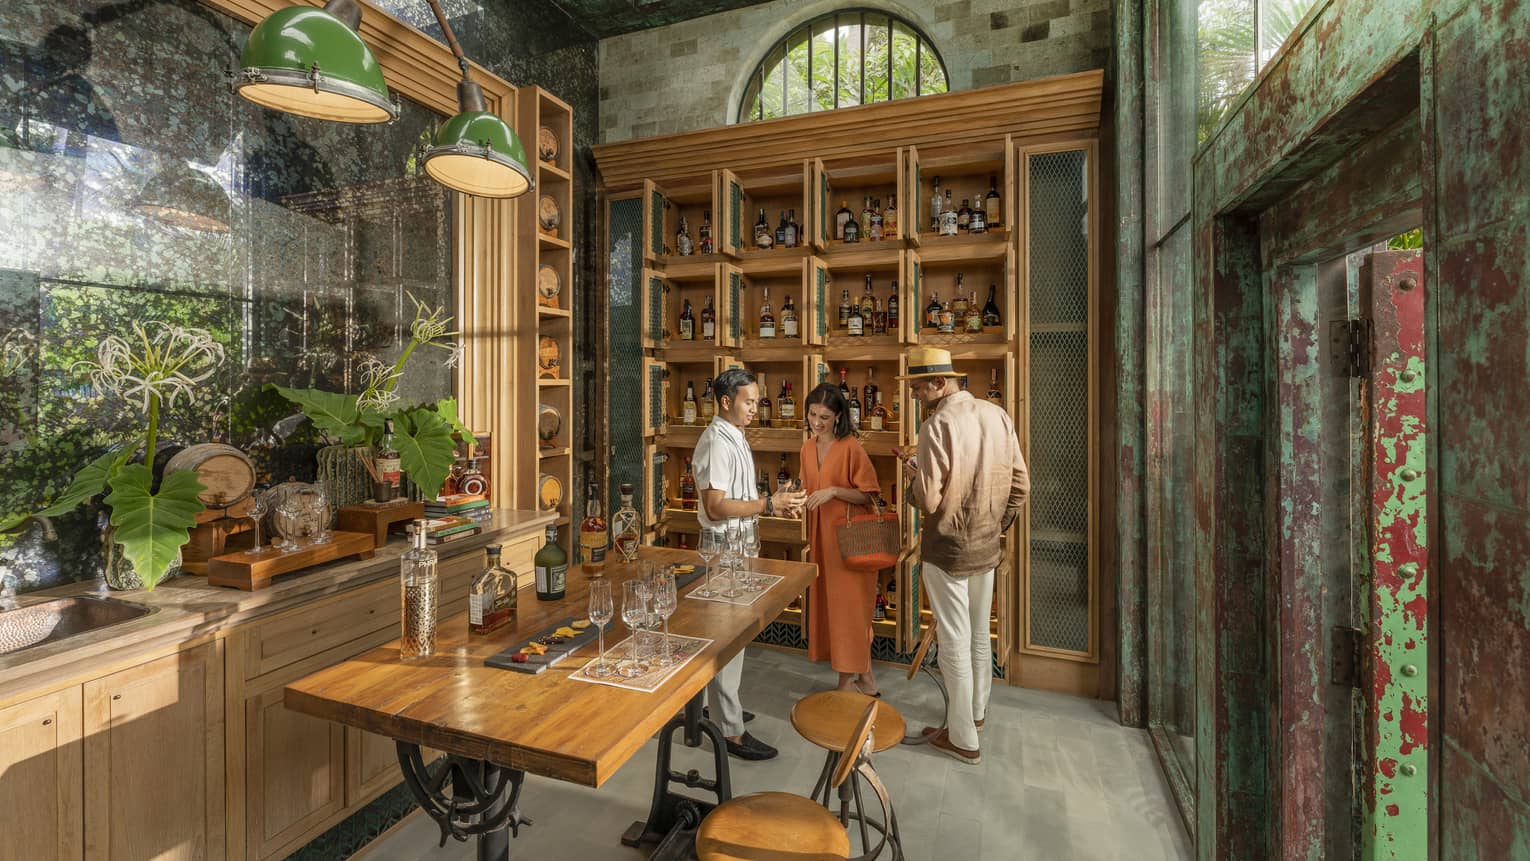 Male staff member offers samples to couple at Rum Vault